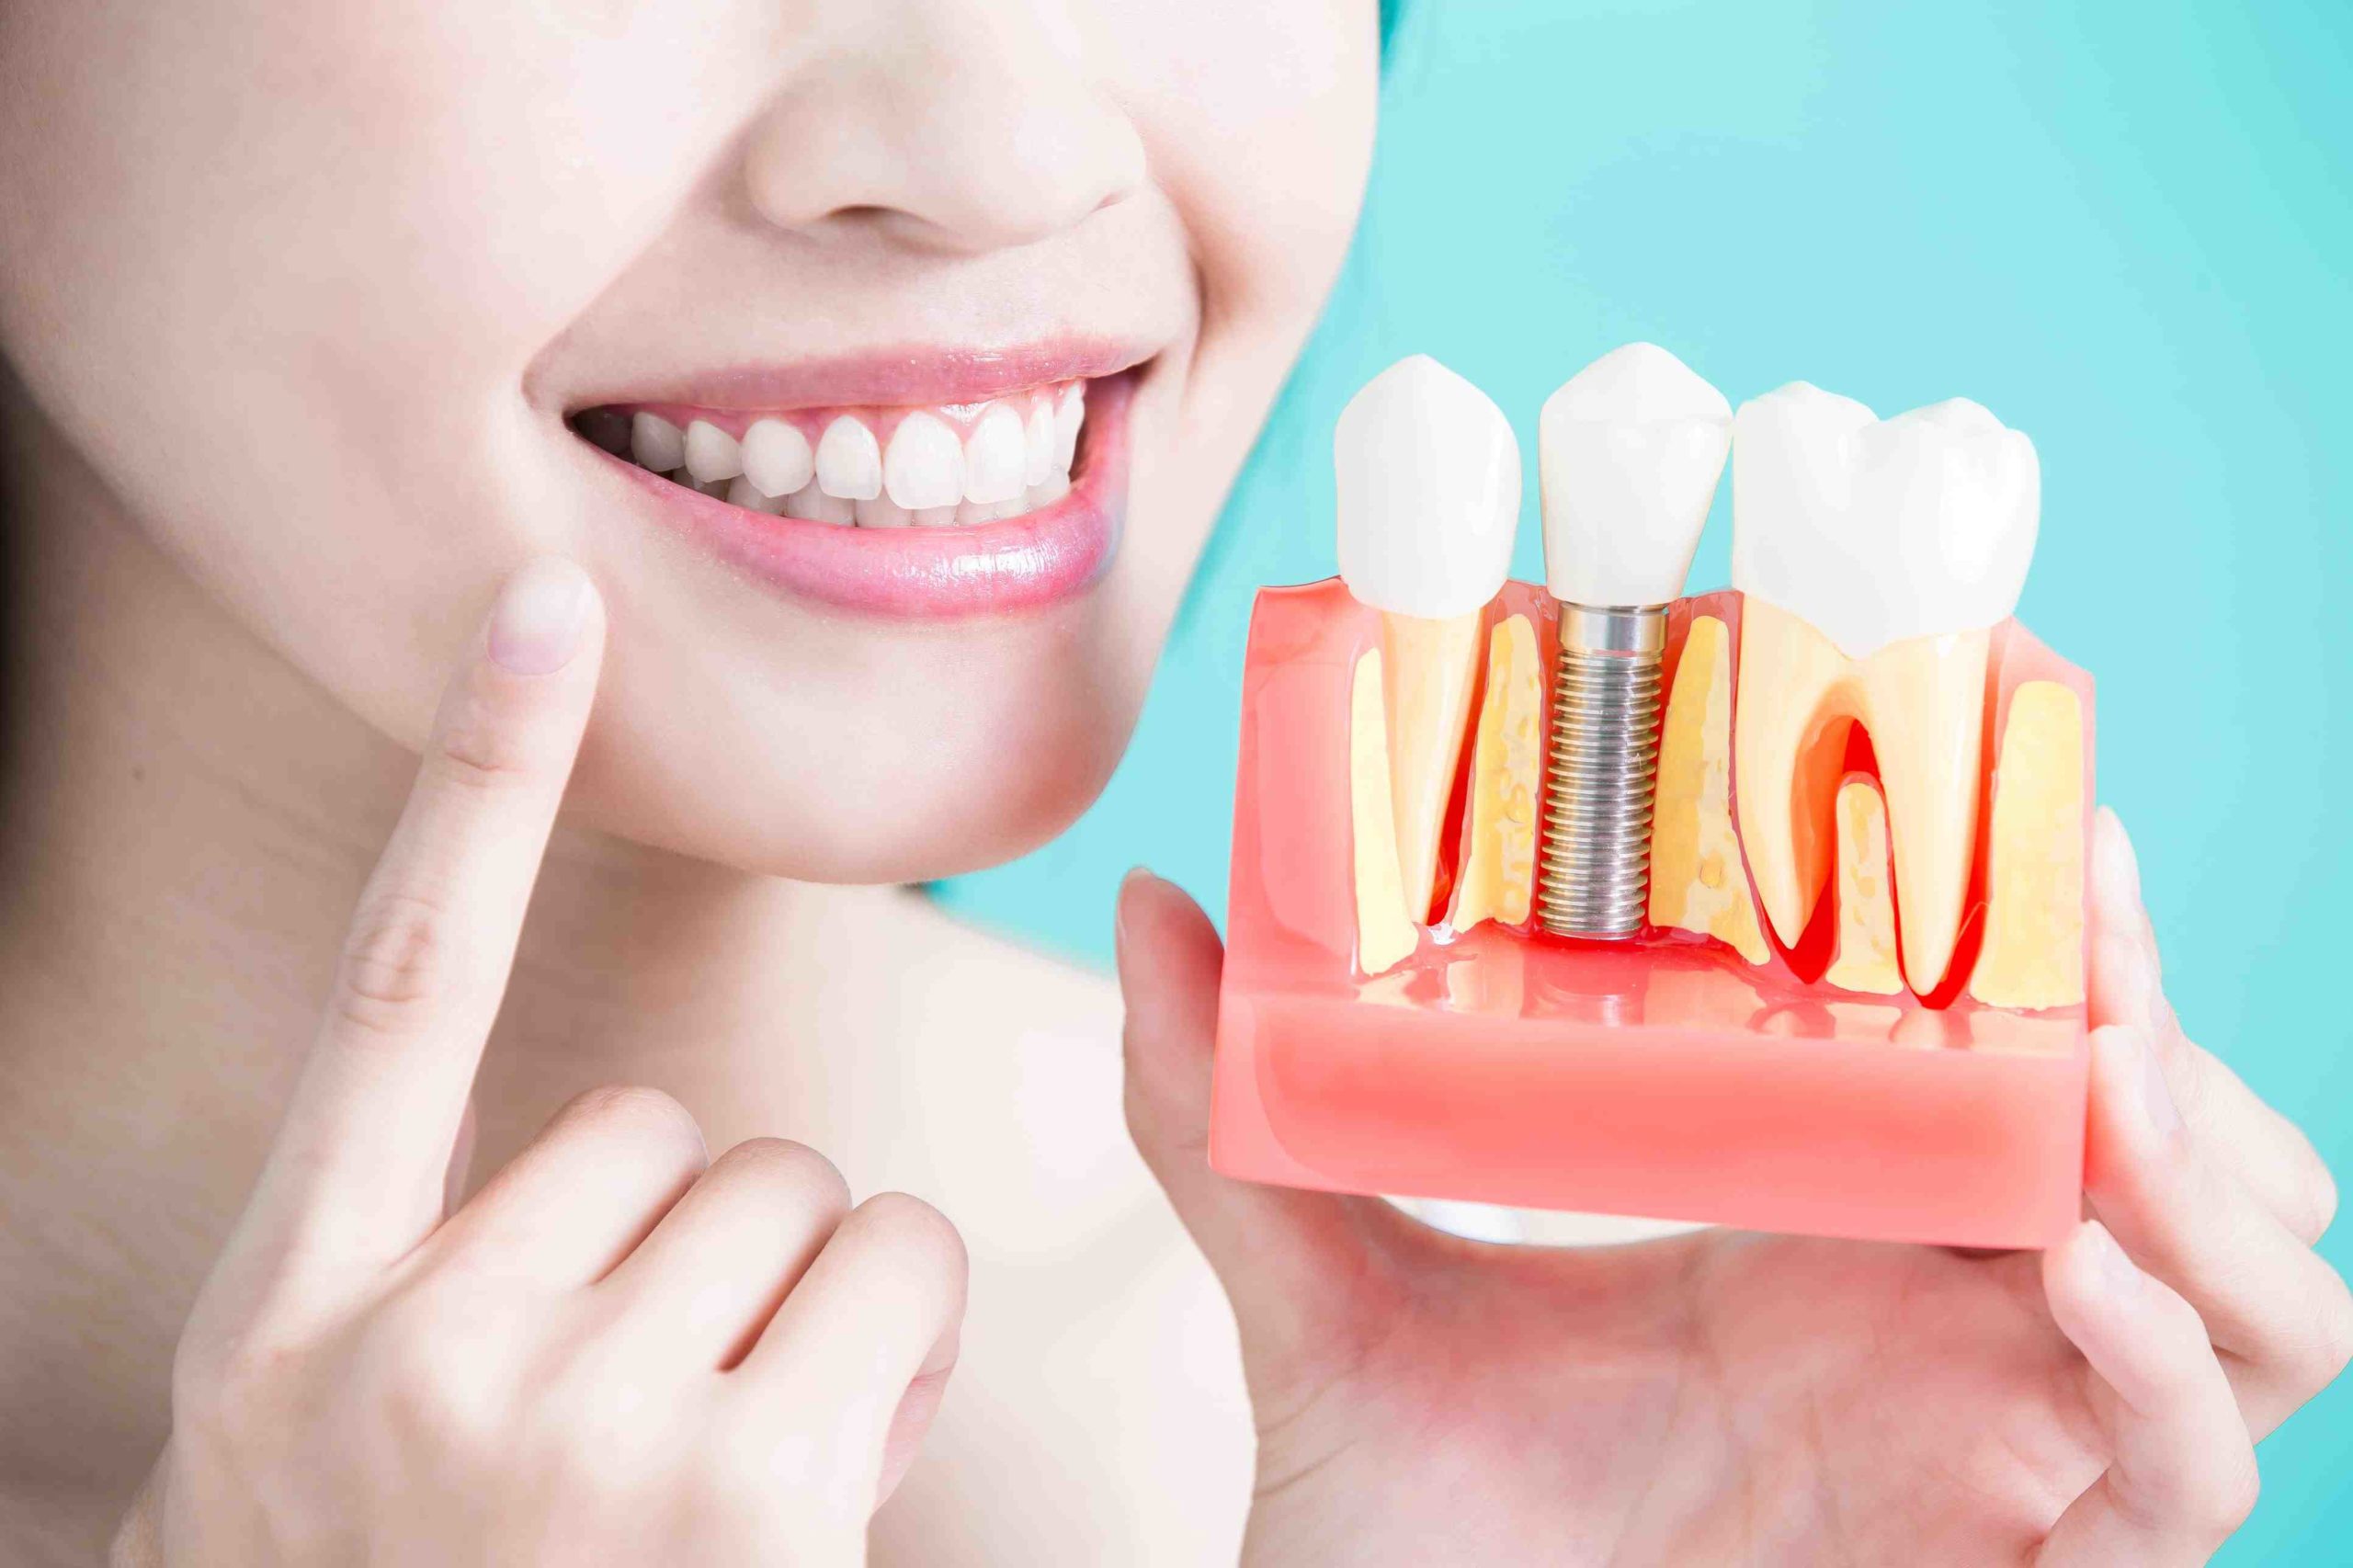 What is the cheapest price for dental implants?